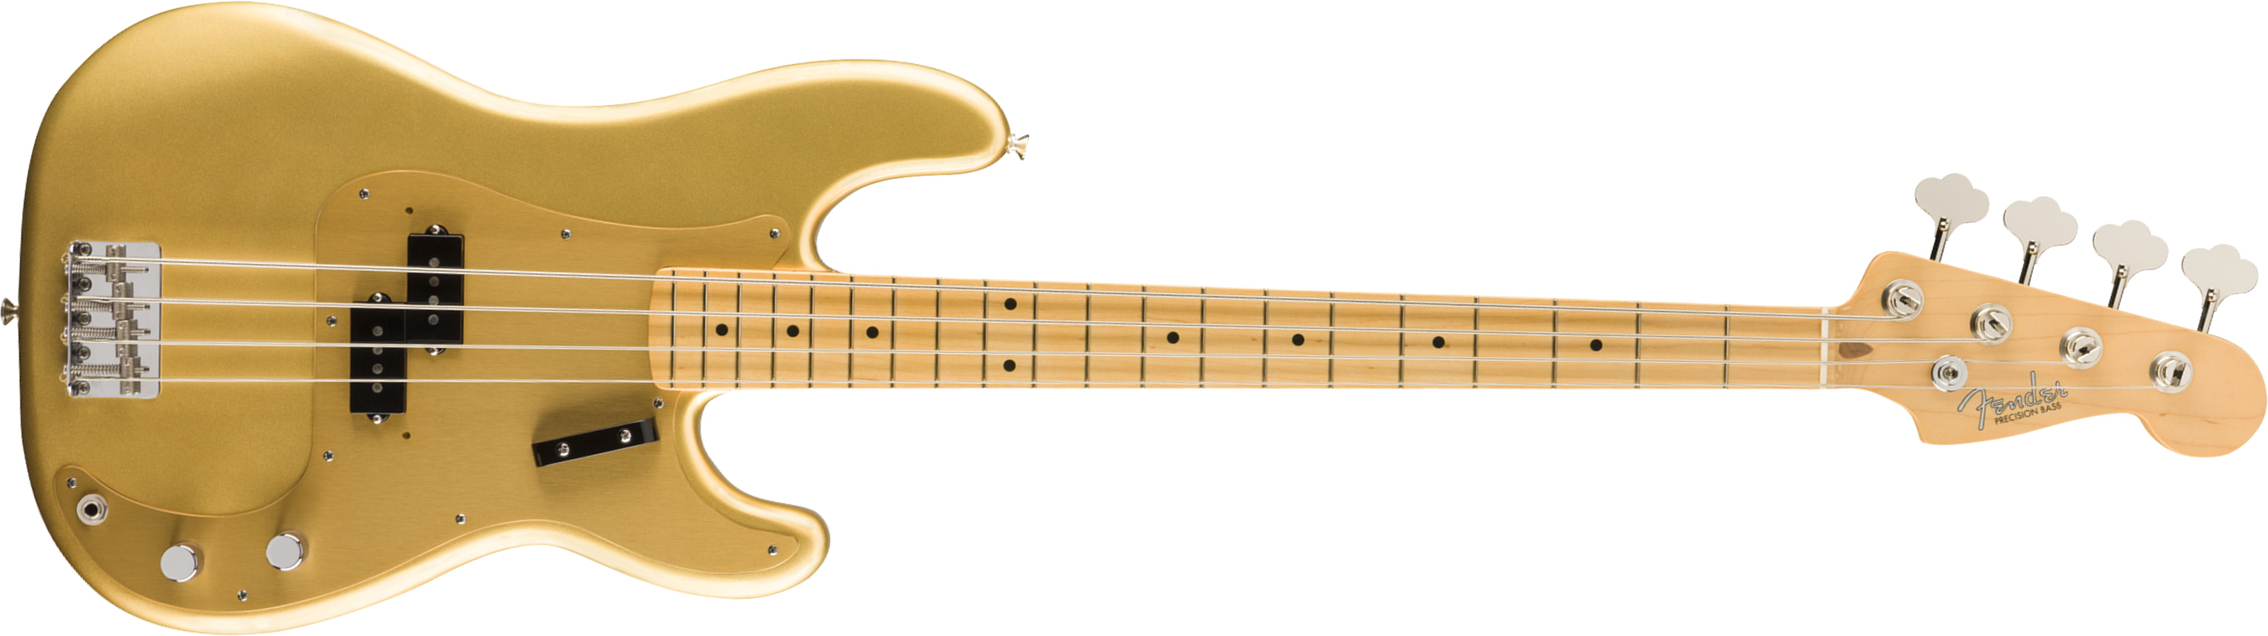 Fender Precision Bass '50s American Original Usa Mn - Aztec Gold - Solid body electric bass - Main picture